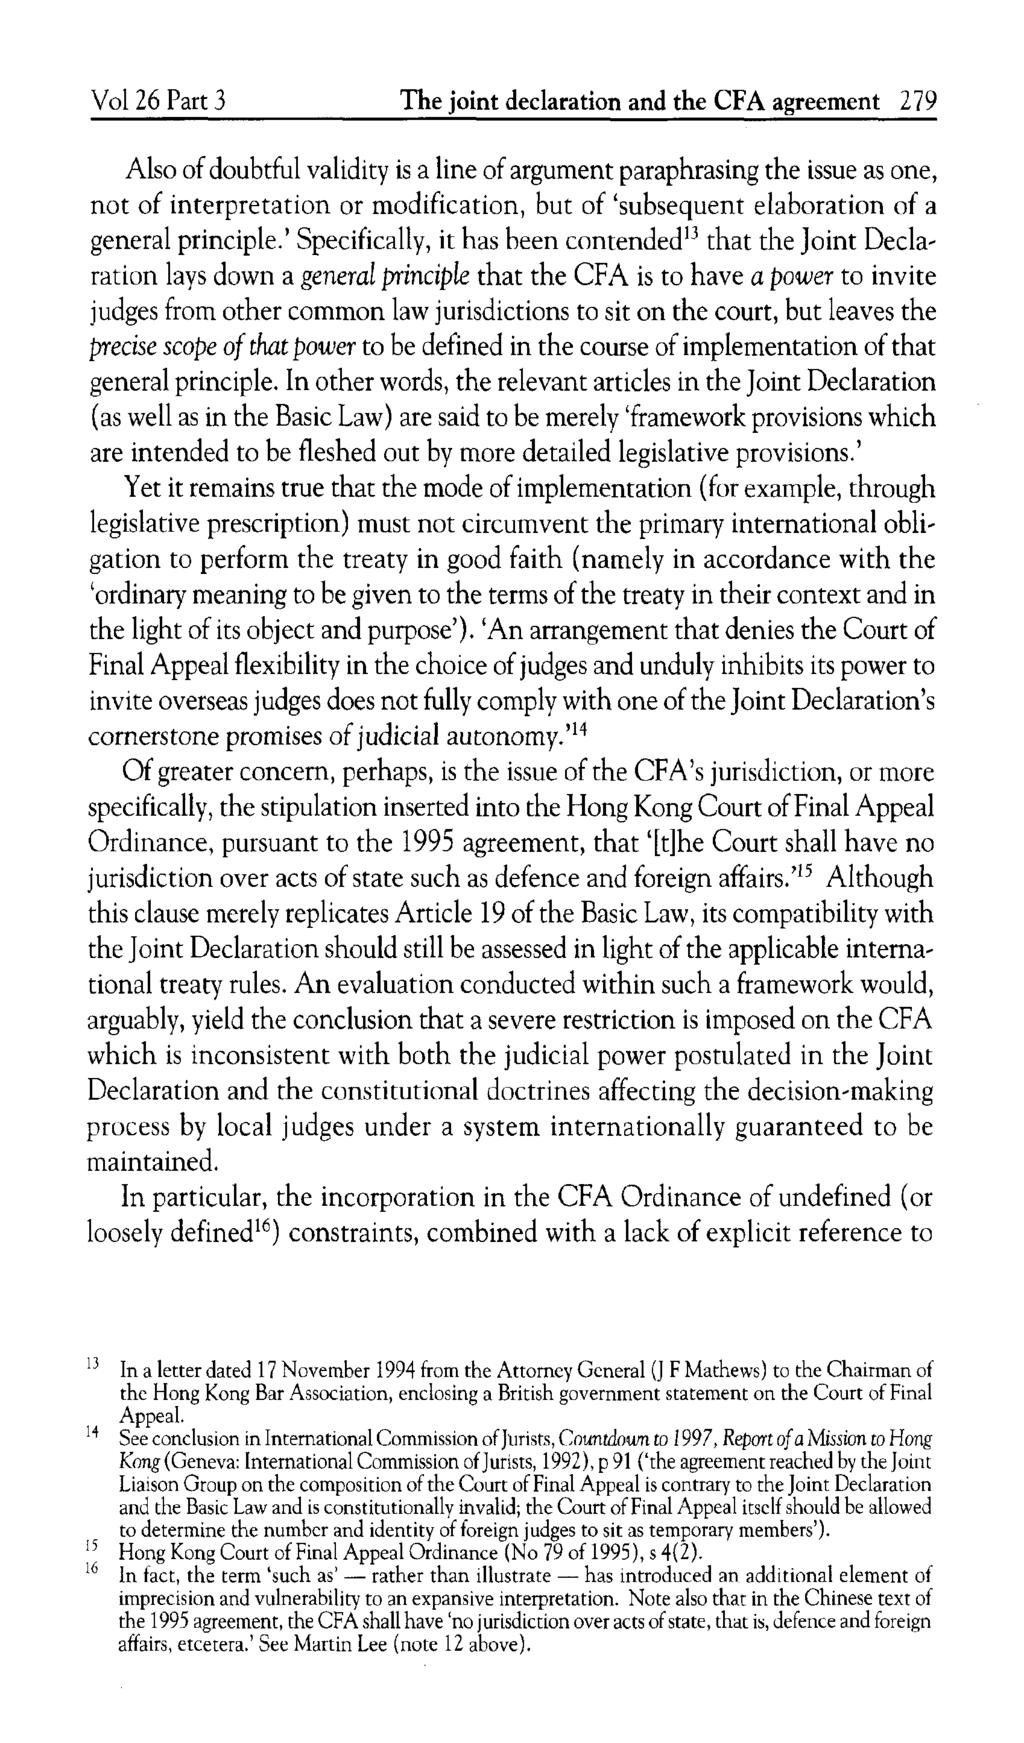 Vol 26 Part 3 The joint declaration and the CFA agreement 279 Also of doubtful validity is a line of argument paraphrasing the issue as one, not of interpretation or modification, but of 'subsequent